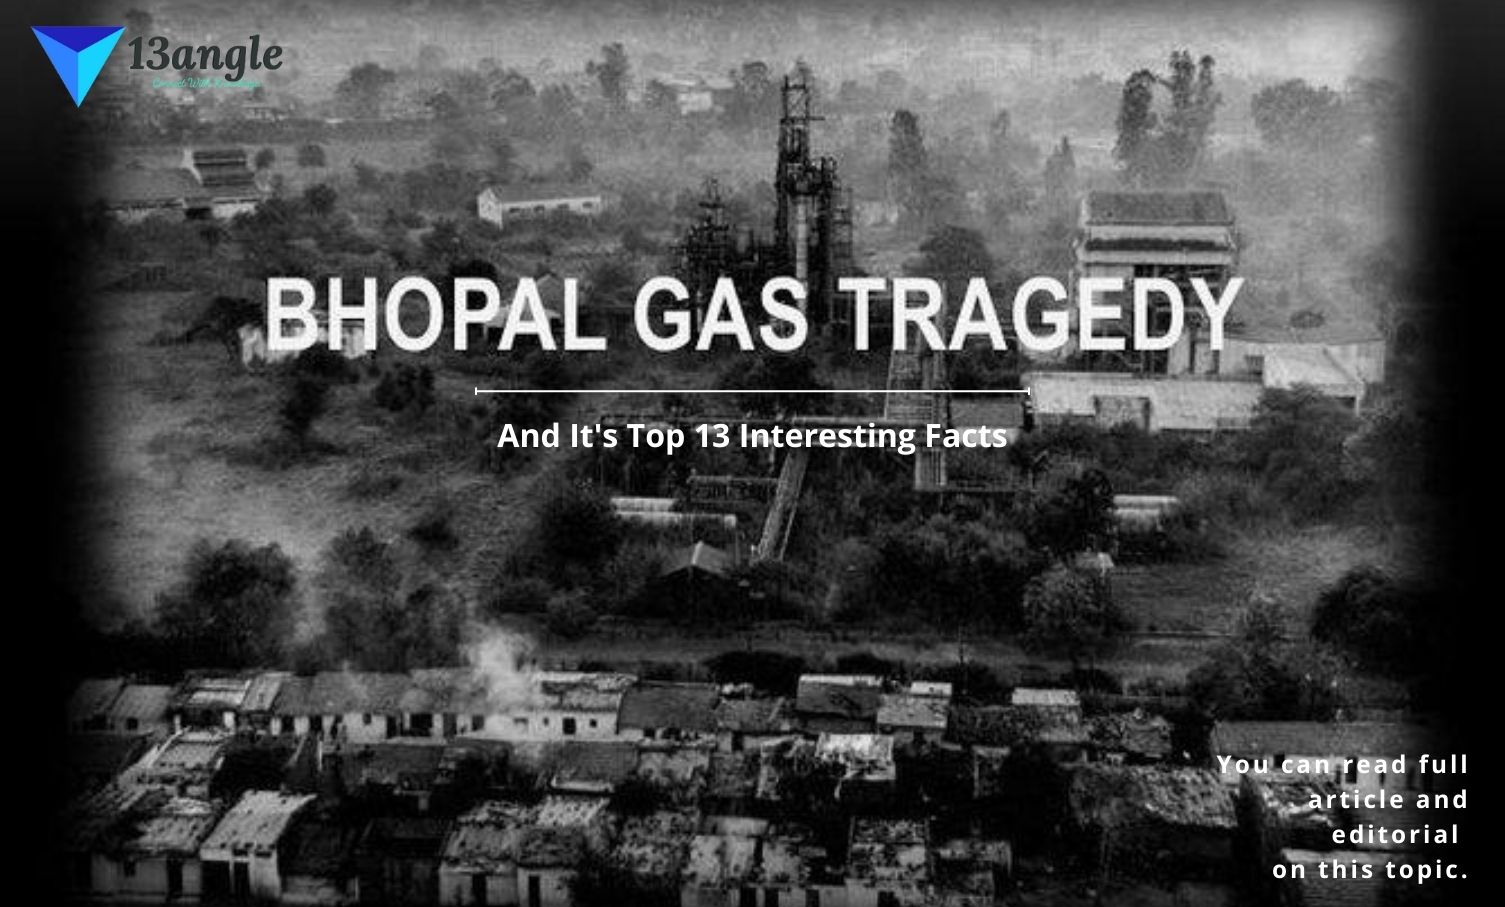 Bhopal disaster And It's Top 13 Interesting Facts- 13angle.com